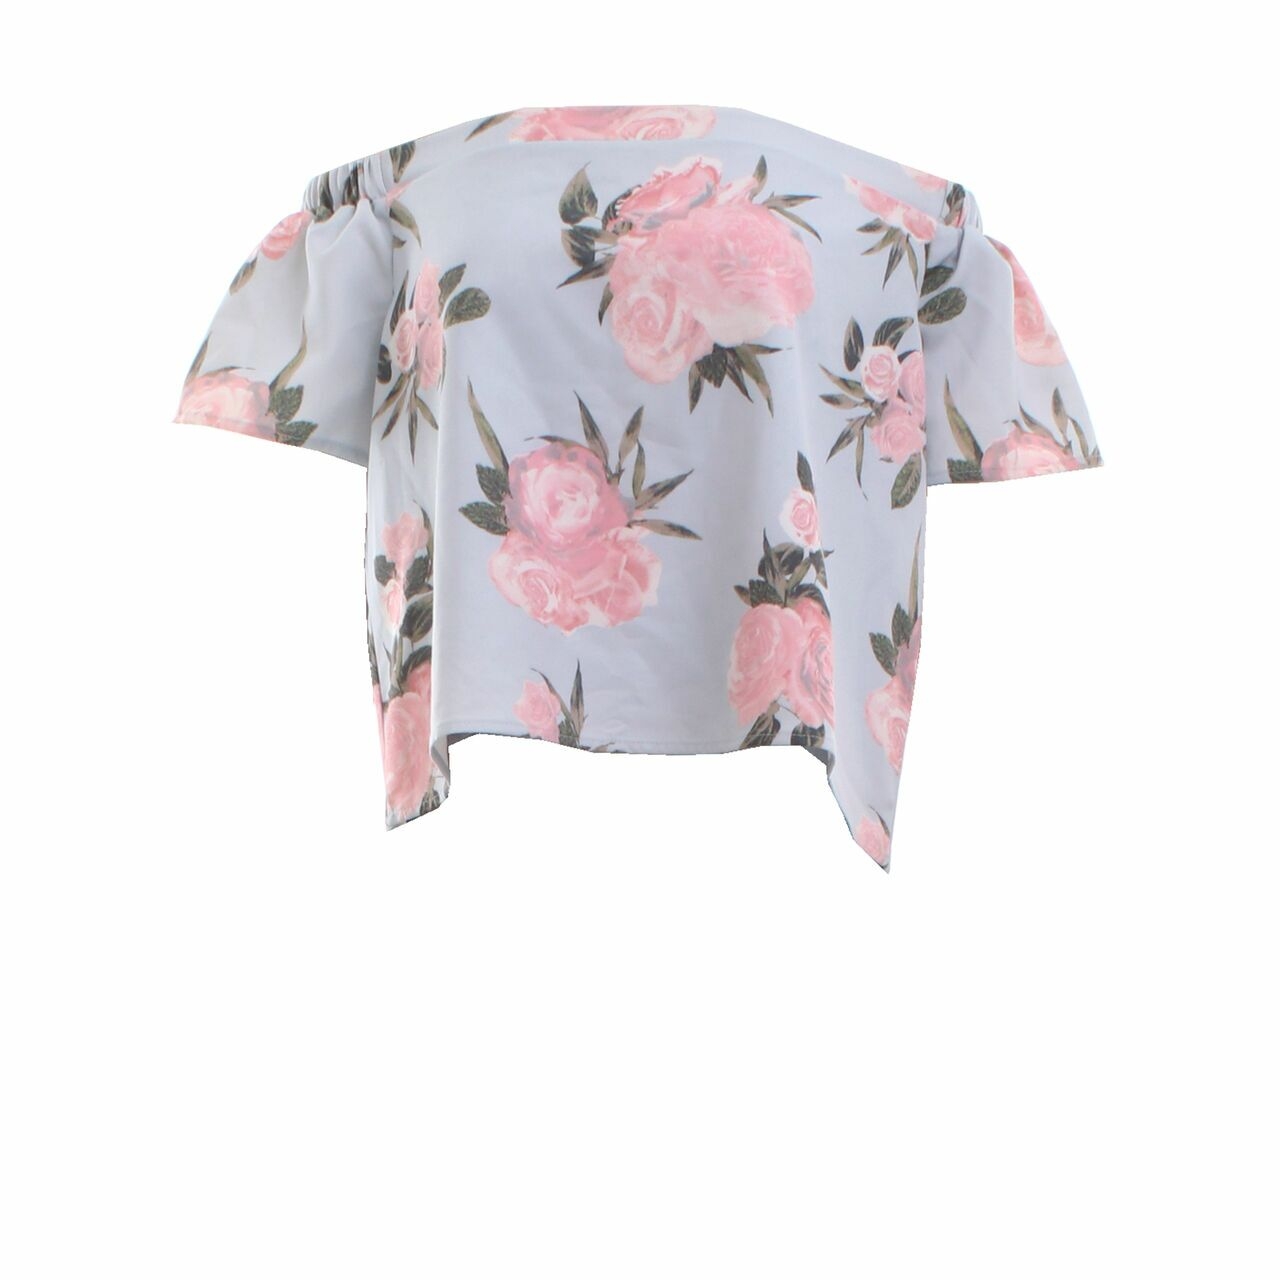 Something Borrowed Blue Floral Blouse